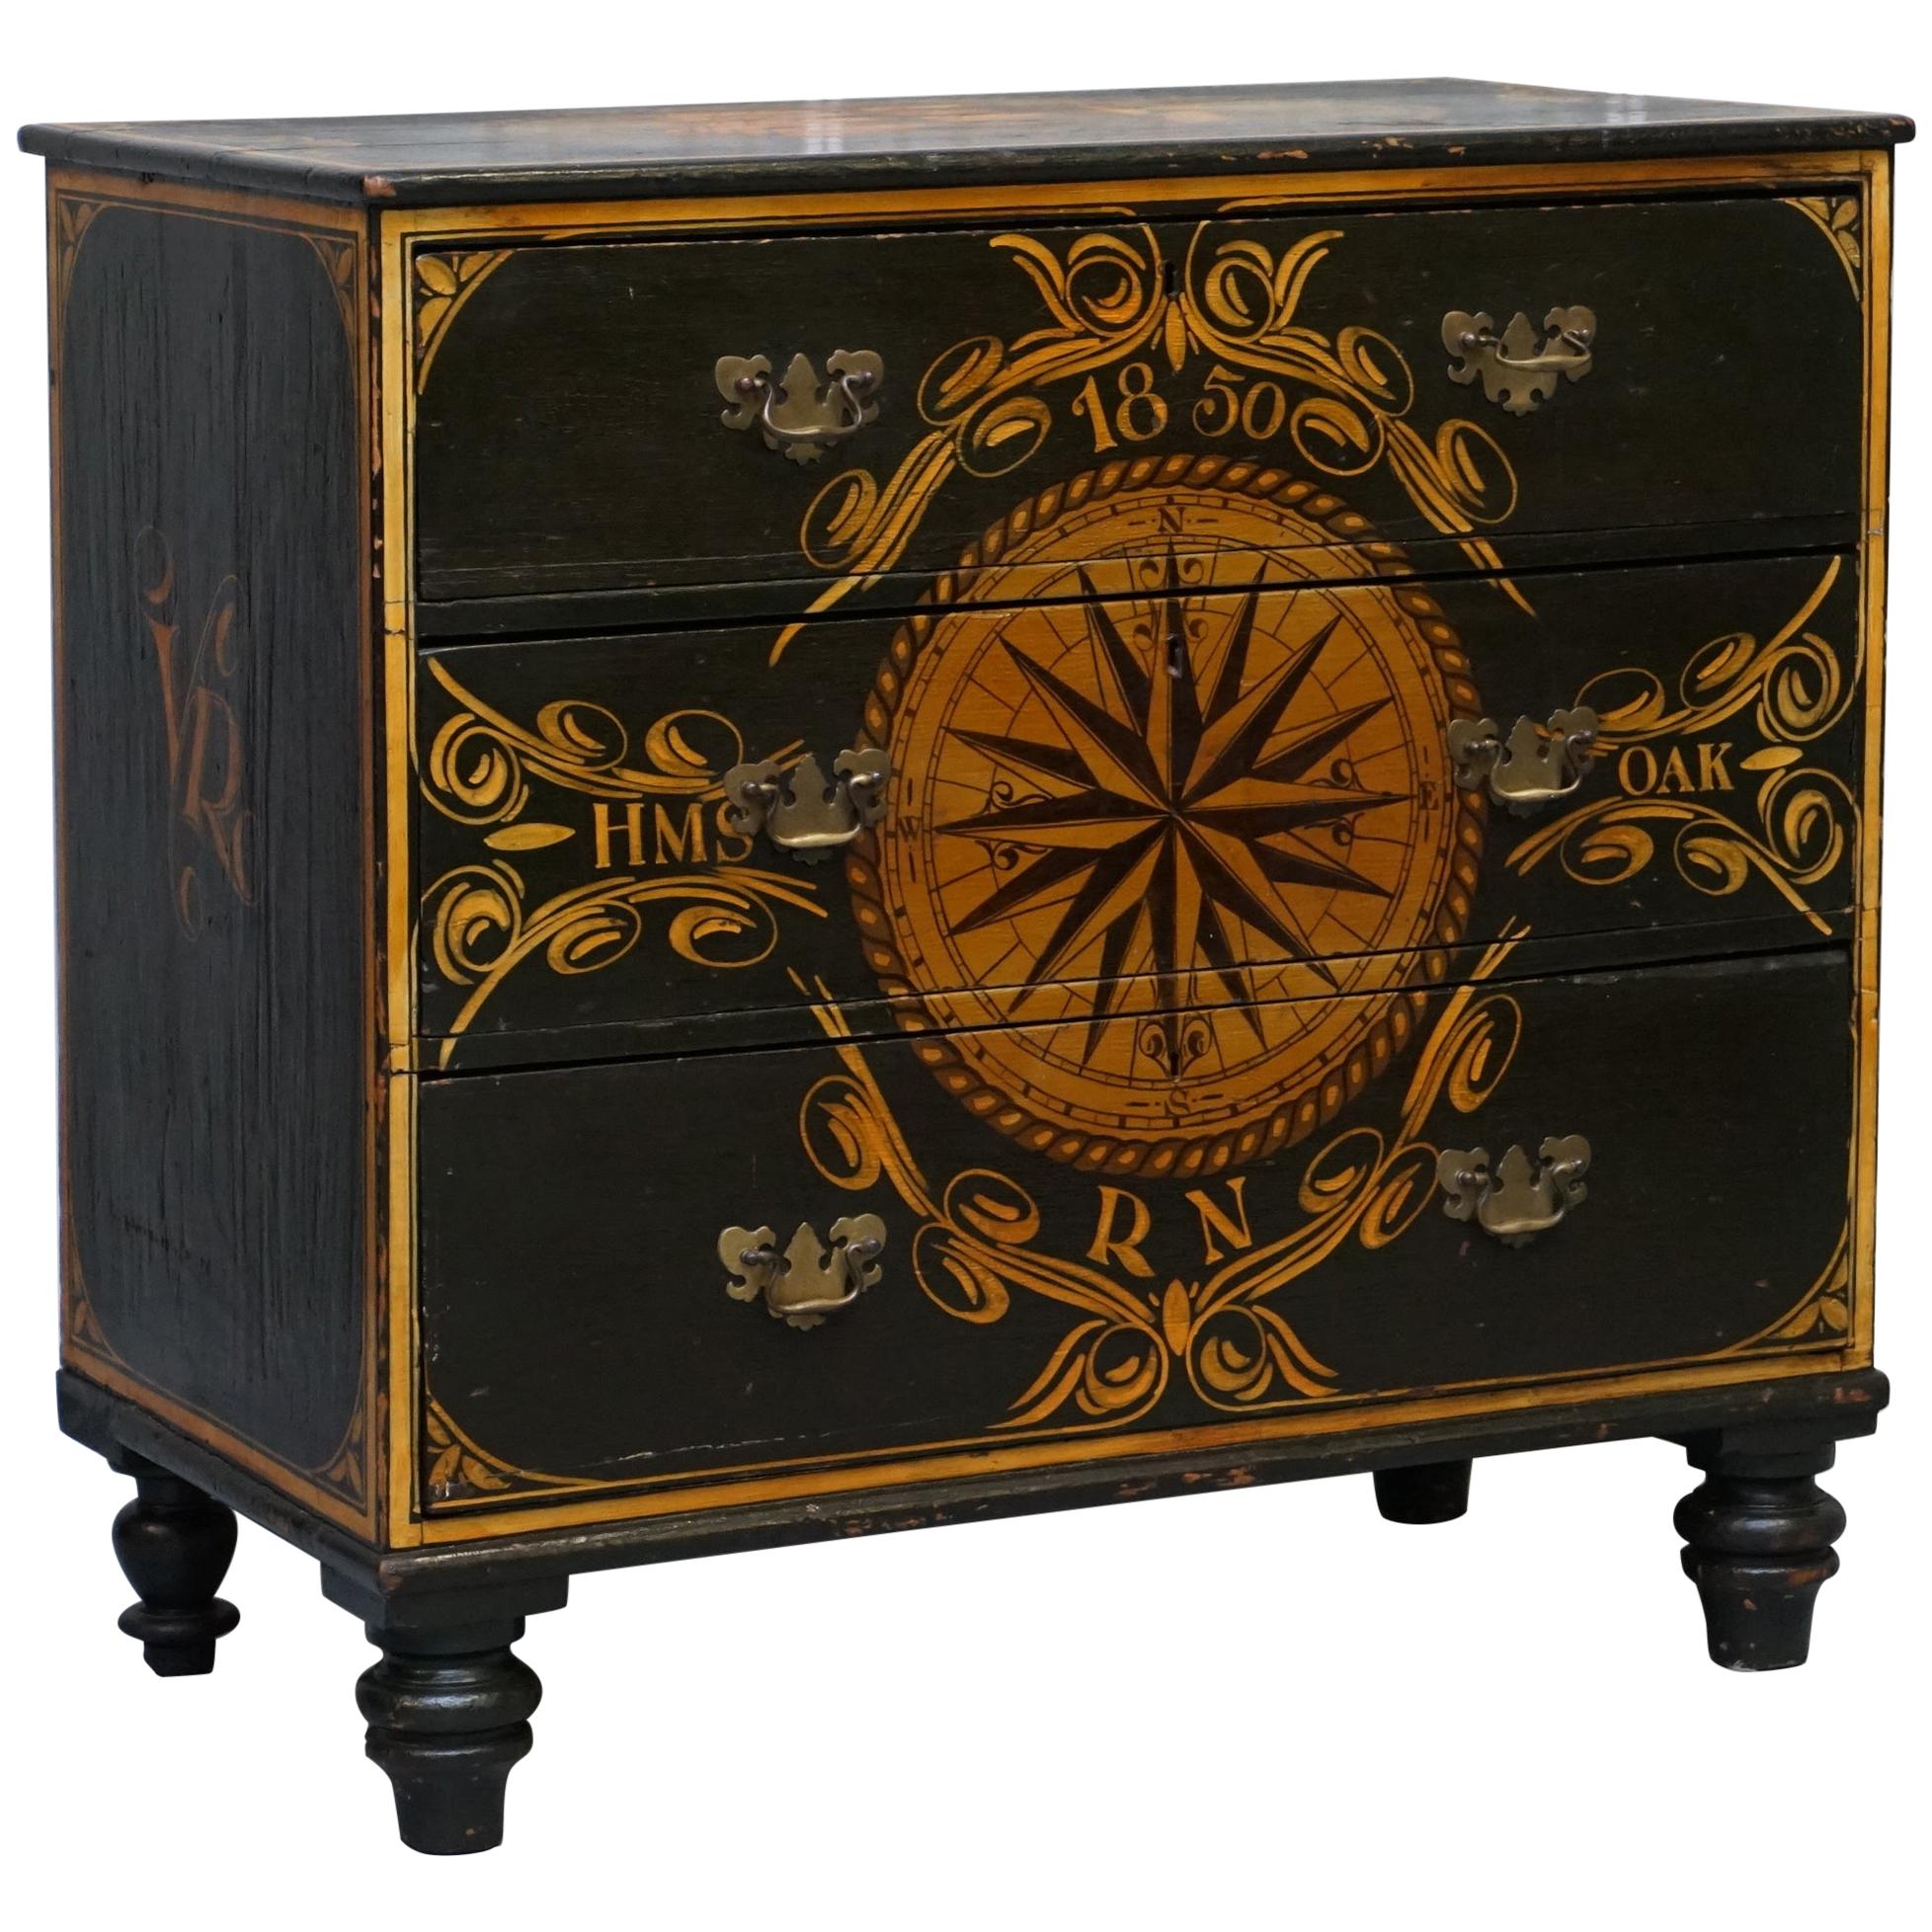 Made from the Timber of Hms Royal Oak Naval Ship Hand Painted Chest of Drawers